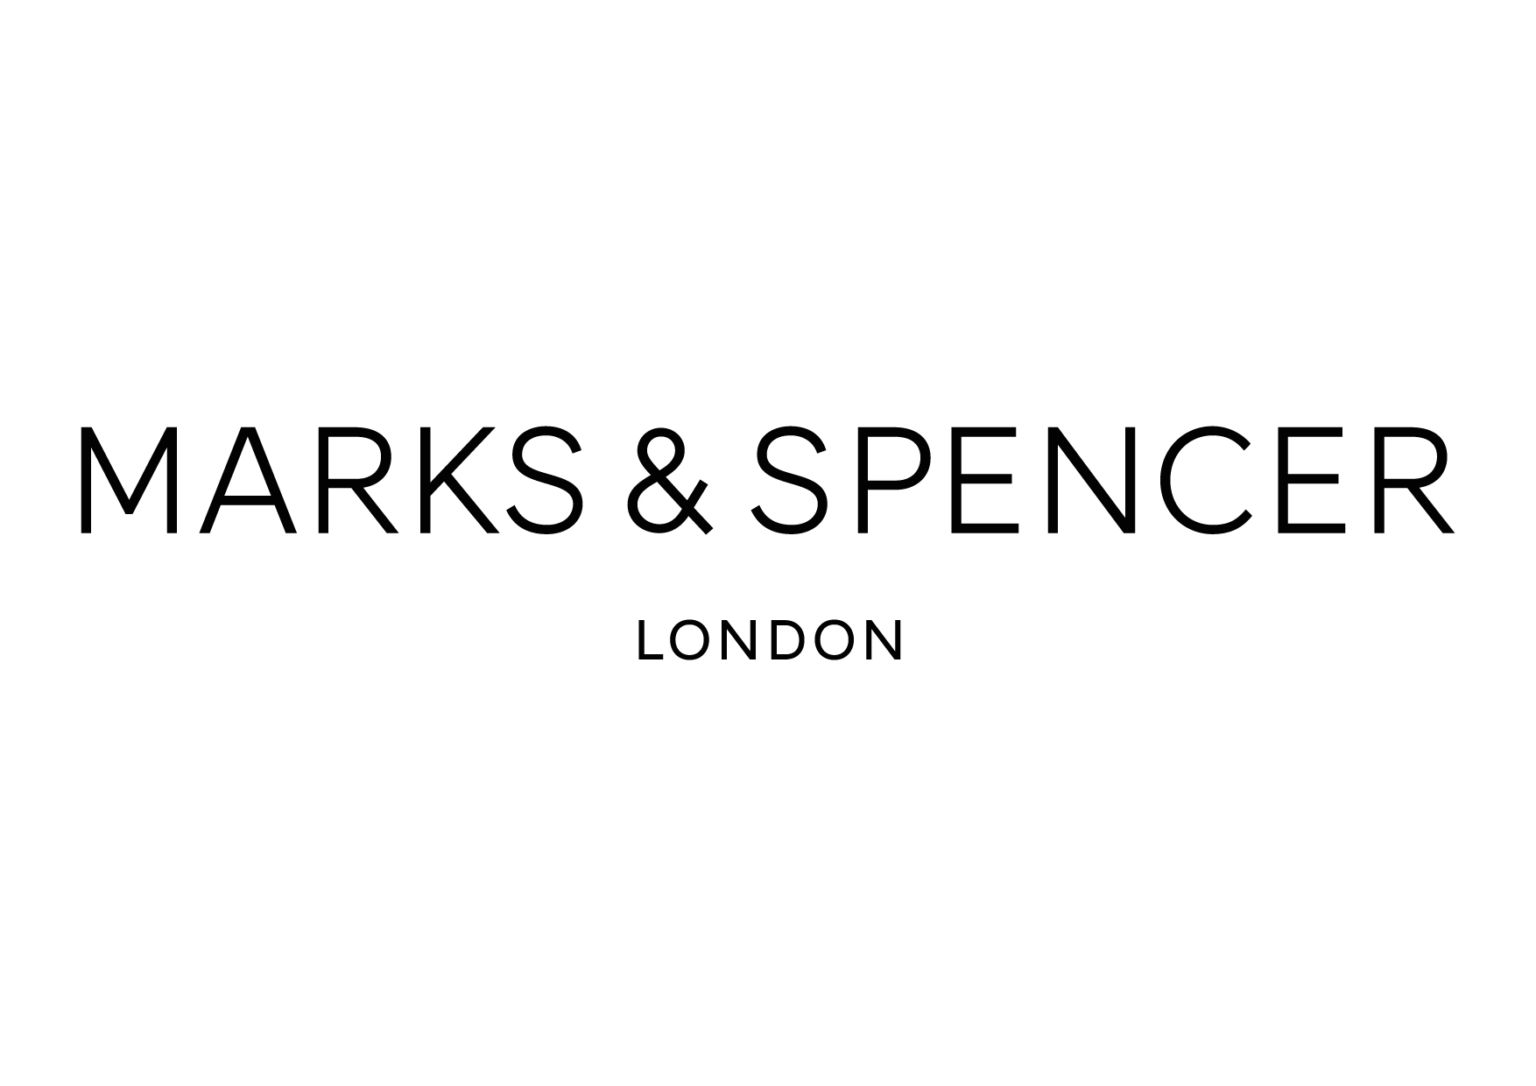 Marks дата. Marks and Spencer. Маркс Спенсер логотип. Маркс энд Спенсер Лондон. Логотип компании Marks & Spenser.